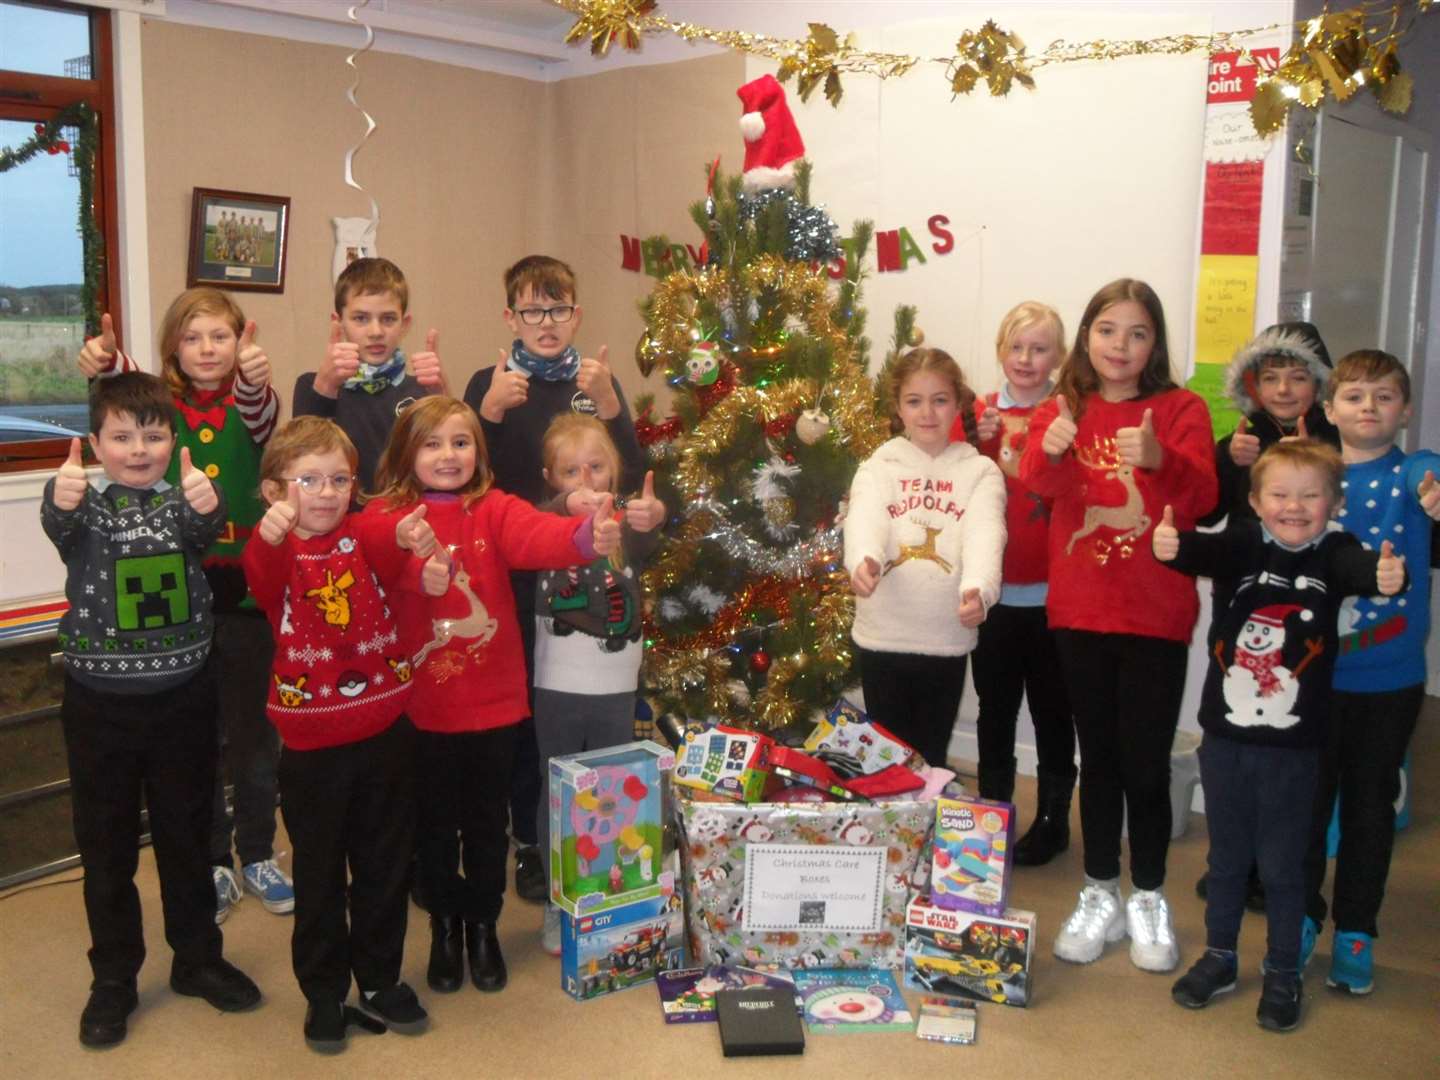 Bower Primary School children with gifts they have gathered for Thurso Community Café to help people less fortunate than themselves.